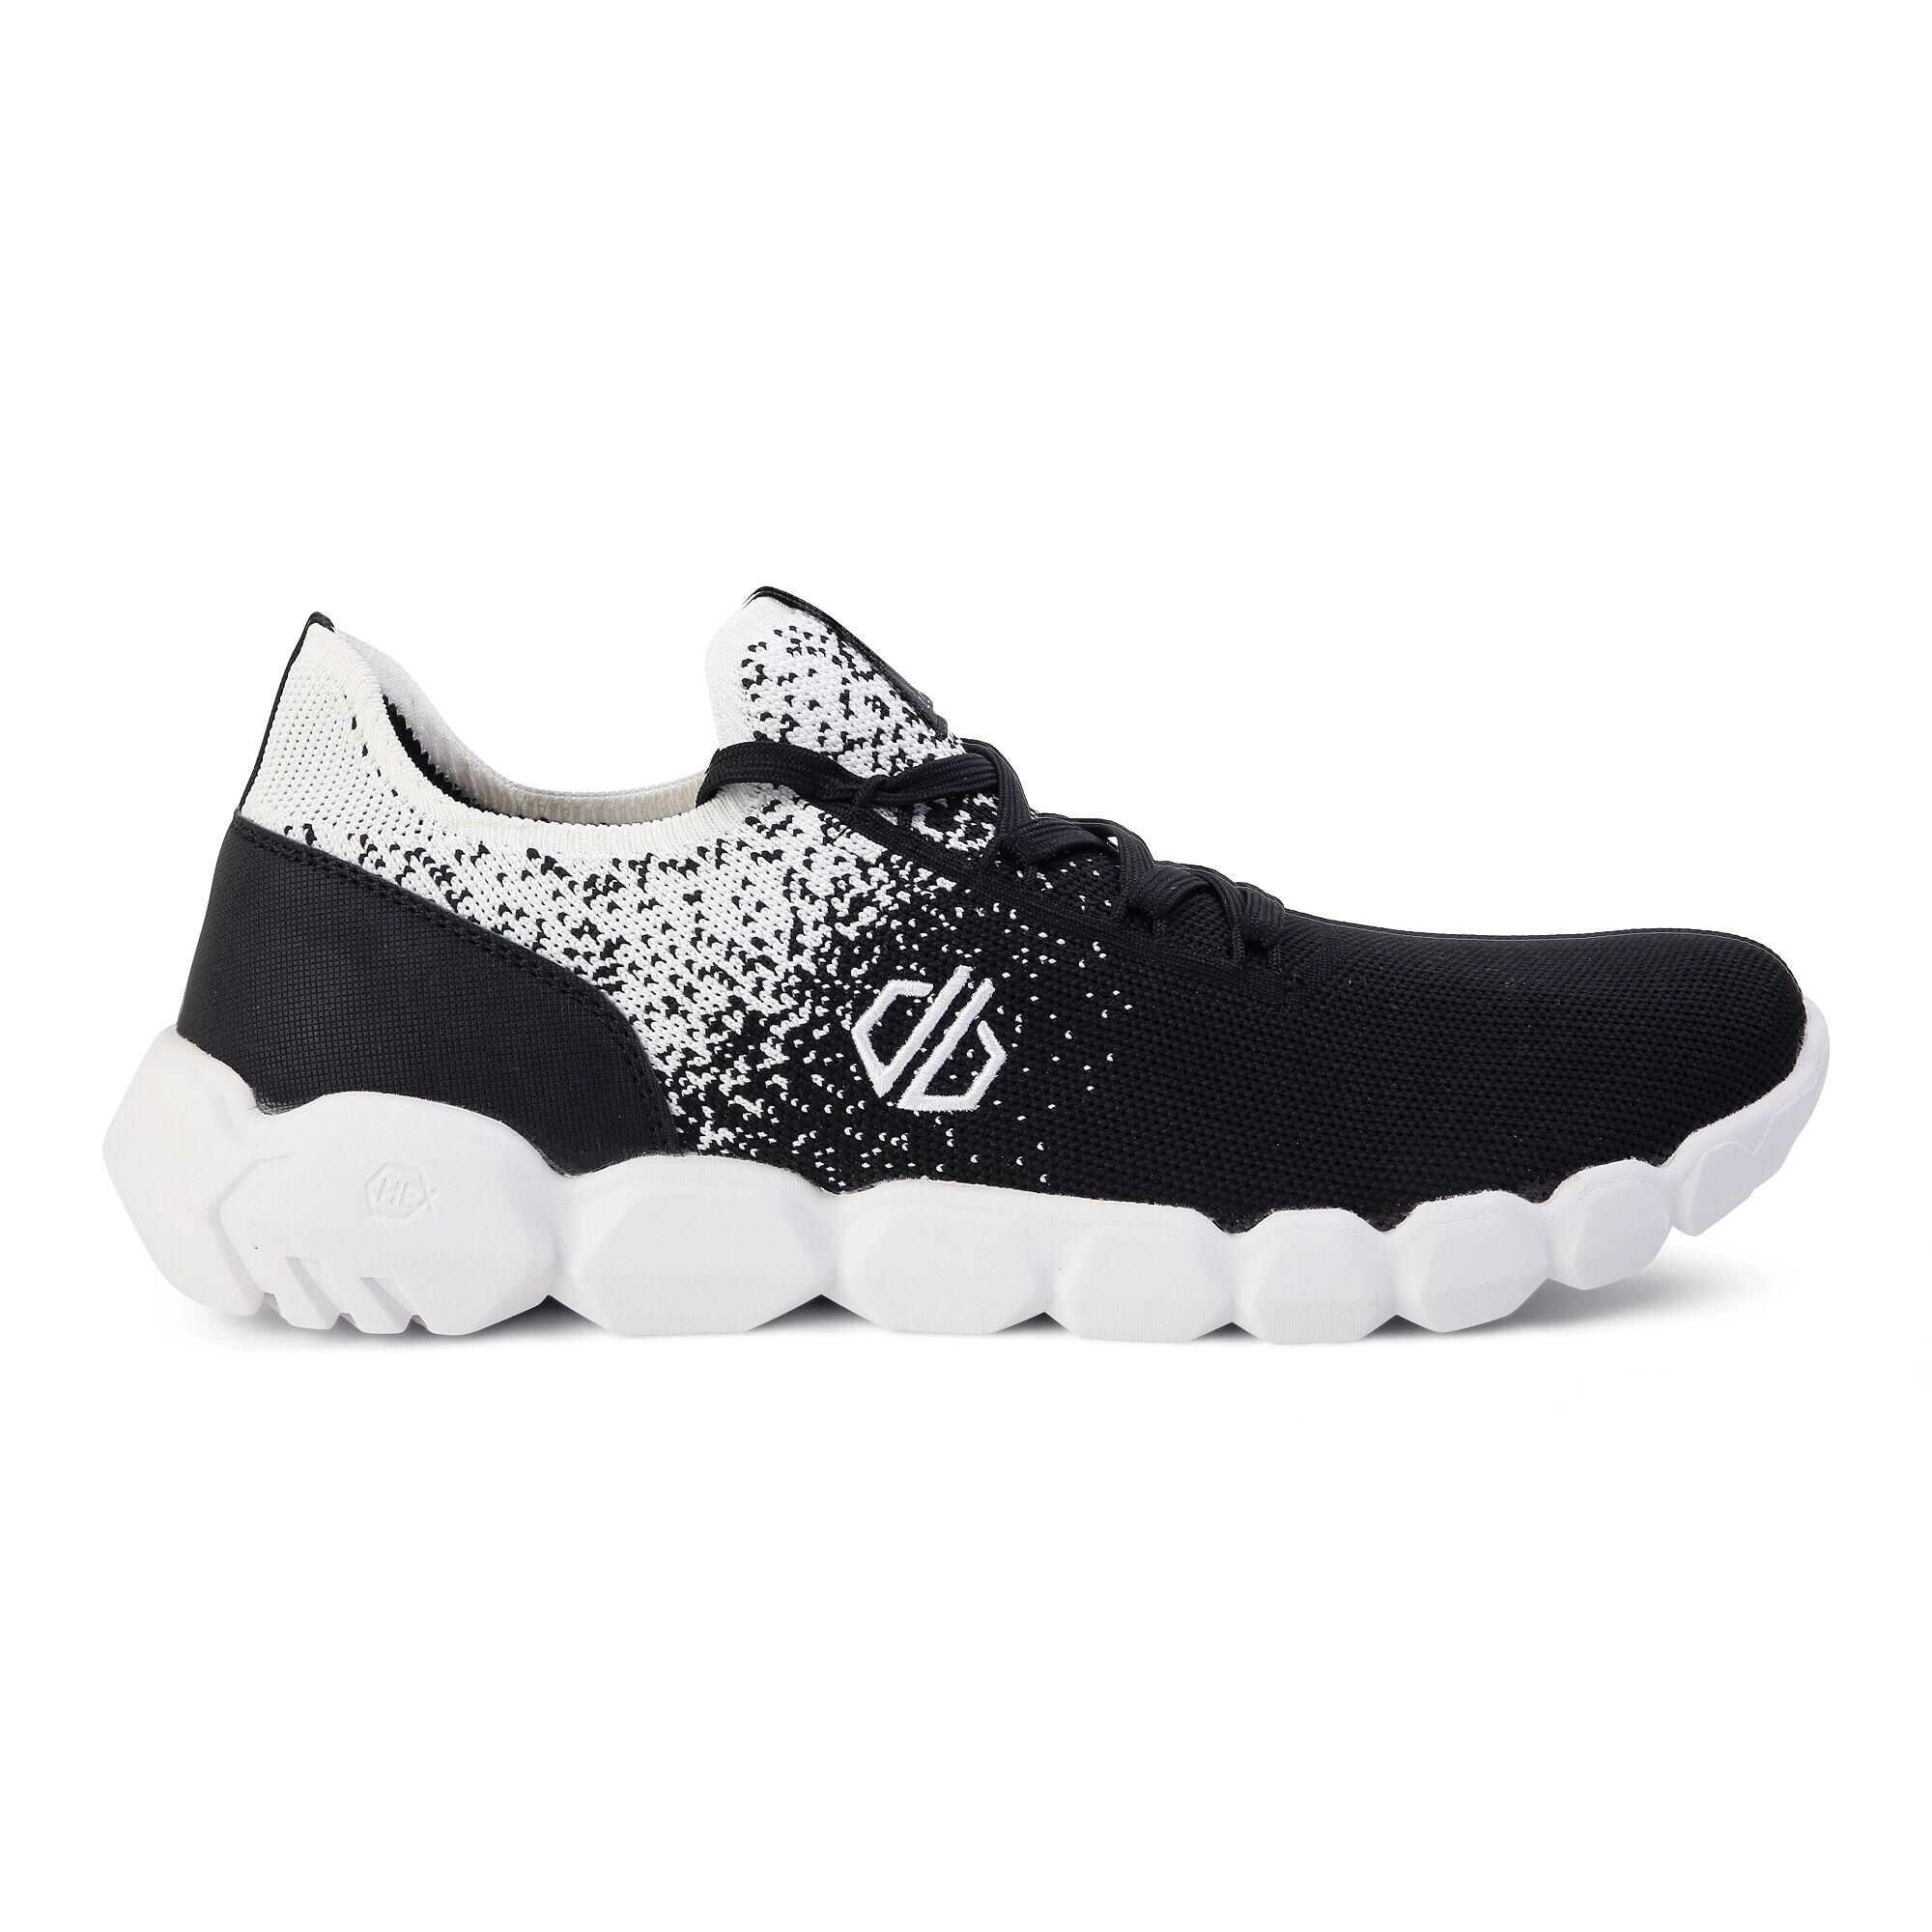 DARE 2B Men's Hex-At Recycled Trainers